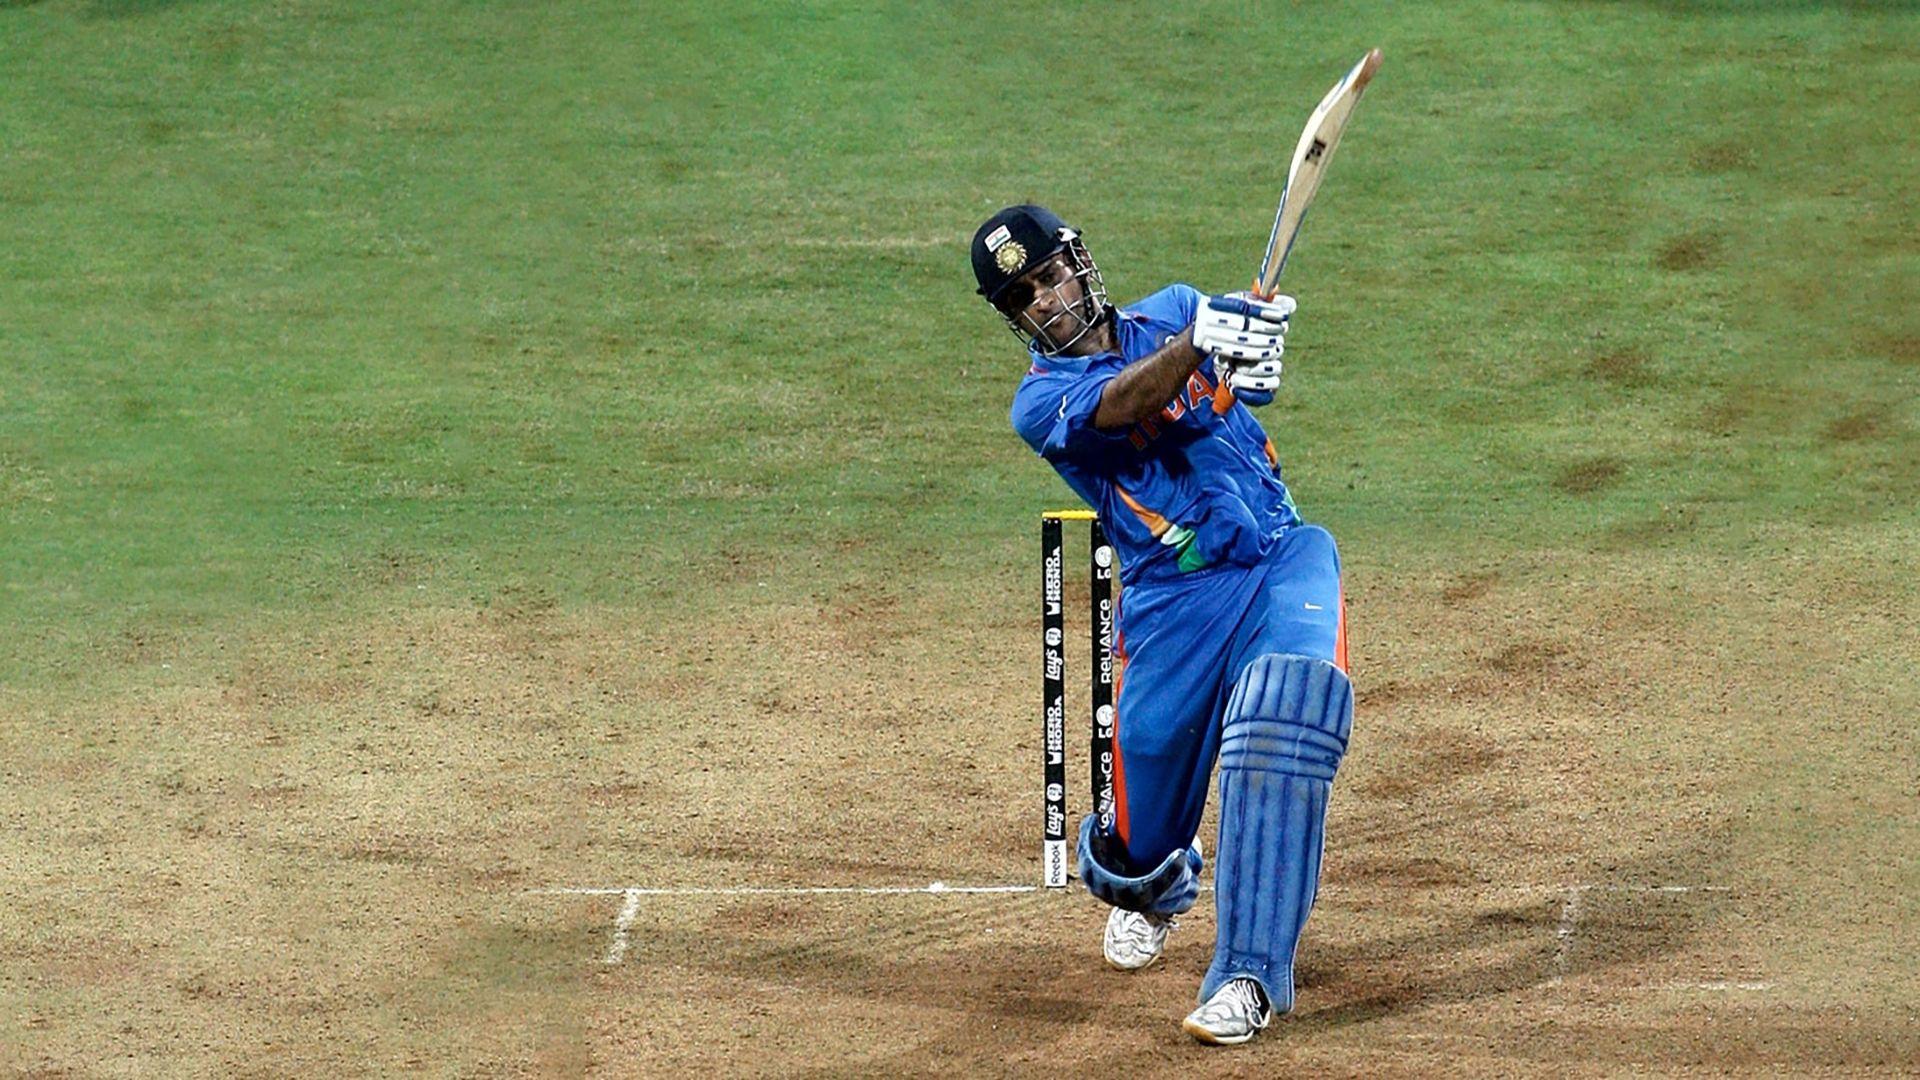 2011 Cricket World Cup Wallpapers - Wallpaper Cave